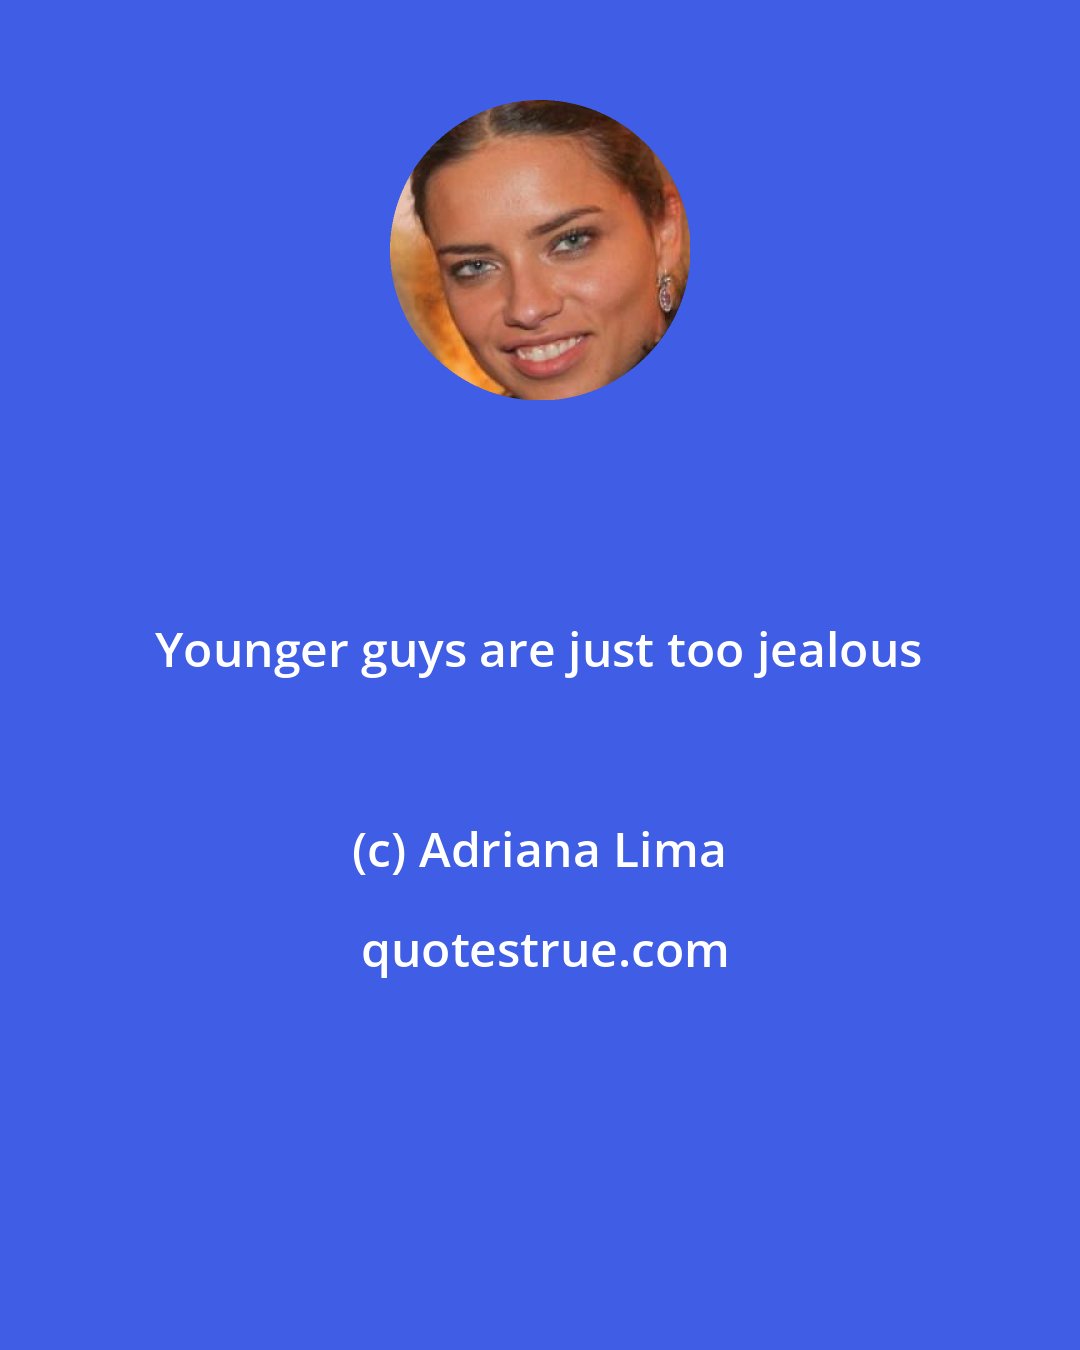 Adriana Lima: Younger guys are just too jealous